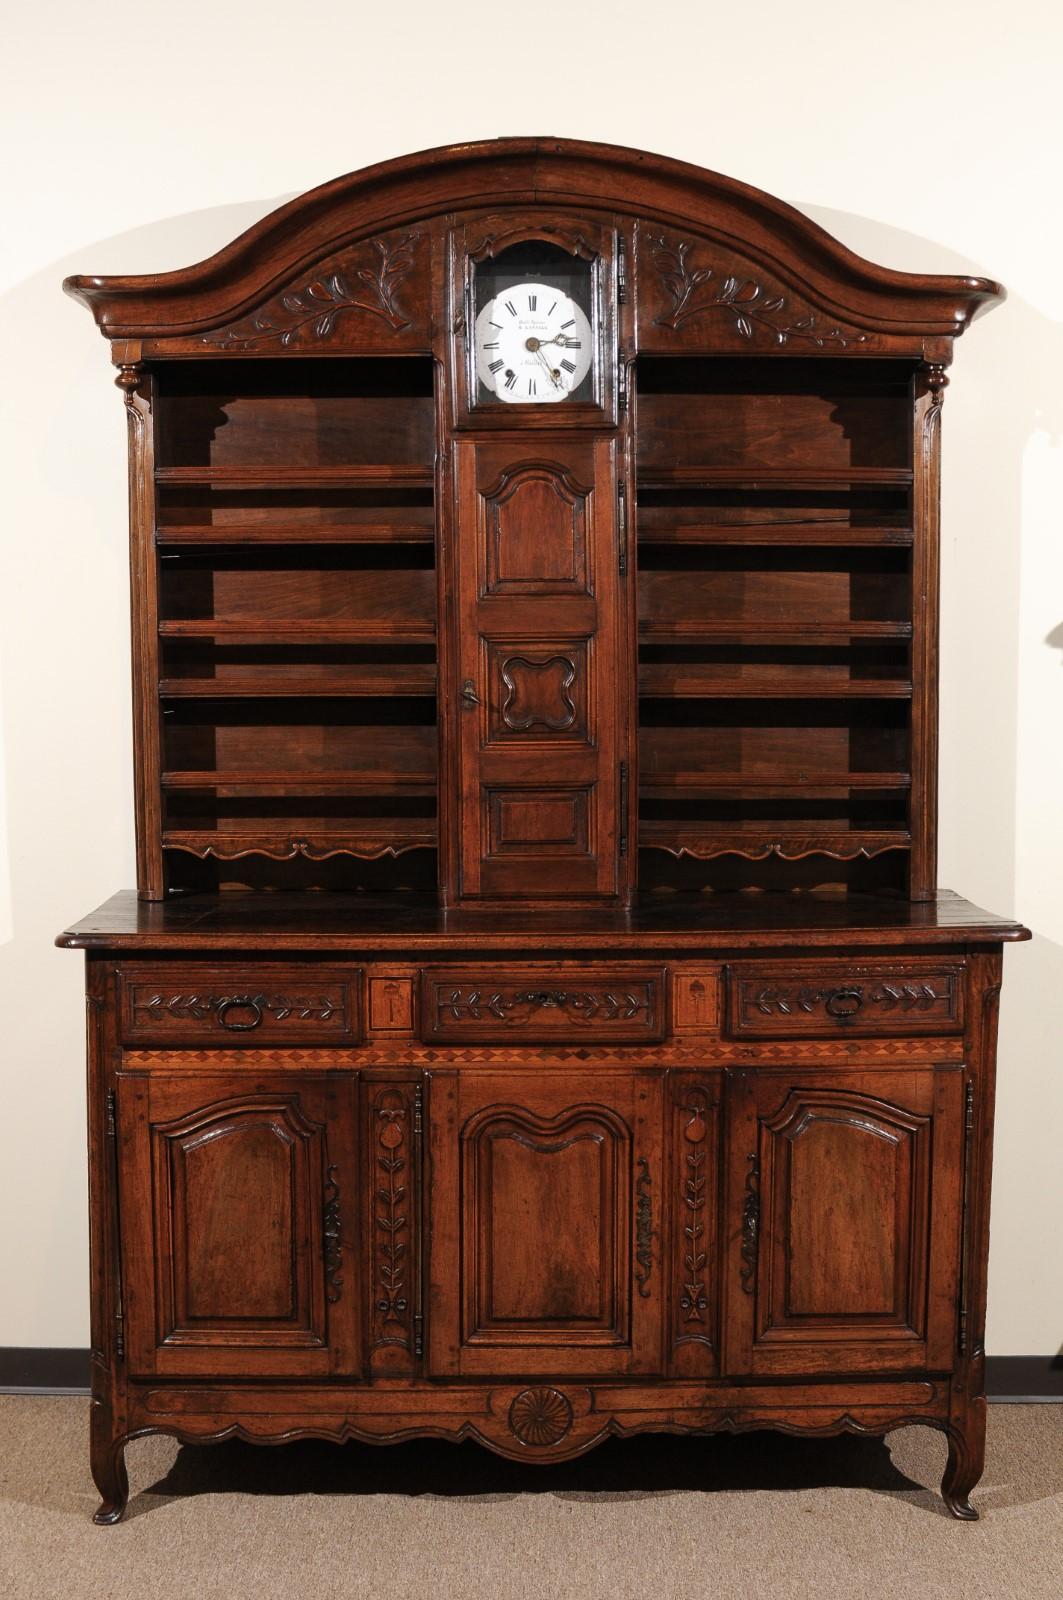 A French 18th century vaisellier in walnut featuring arched cornice, plate rack with enclosed clock workings, 3 paneled door cabinet below with foliage carving and parquetry inlay and shaped apron ending on cabriole feet. The Vaisellier has